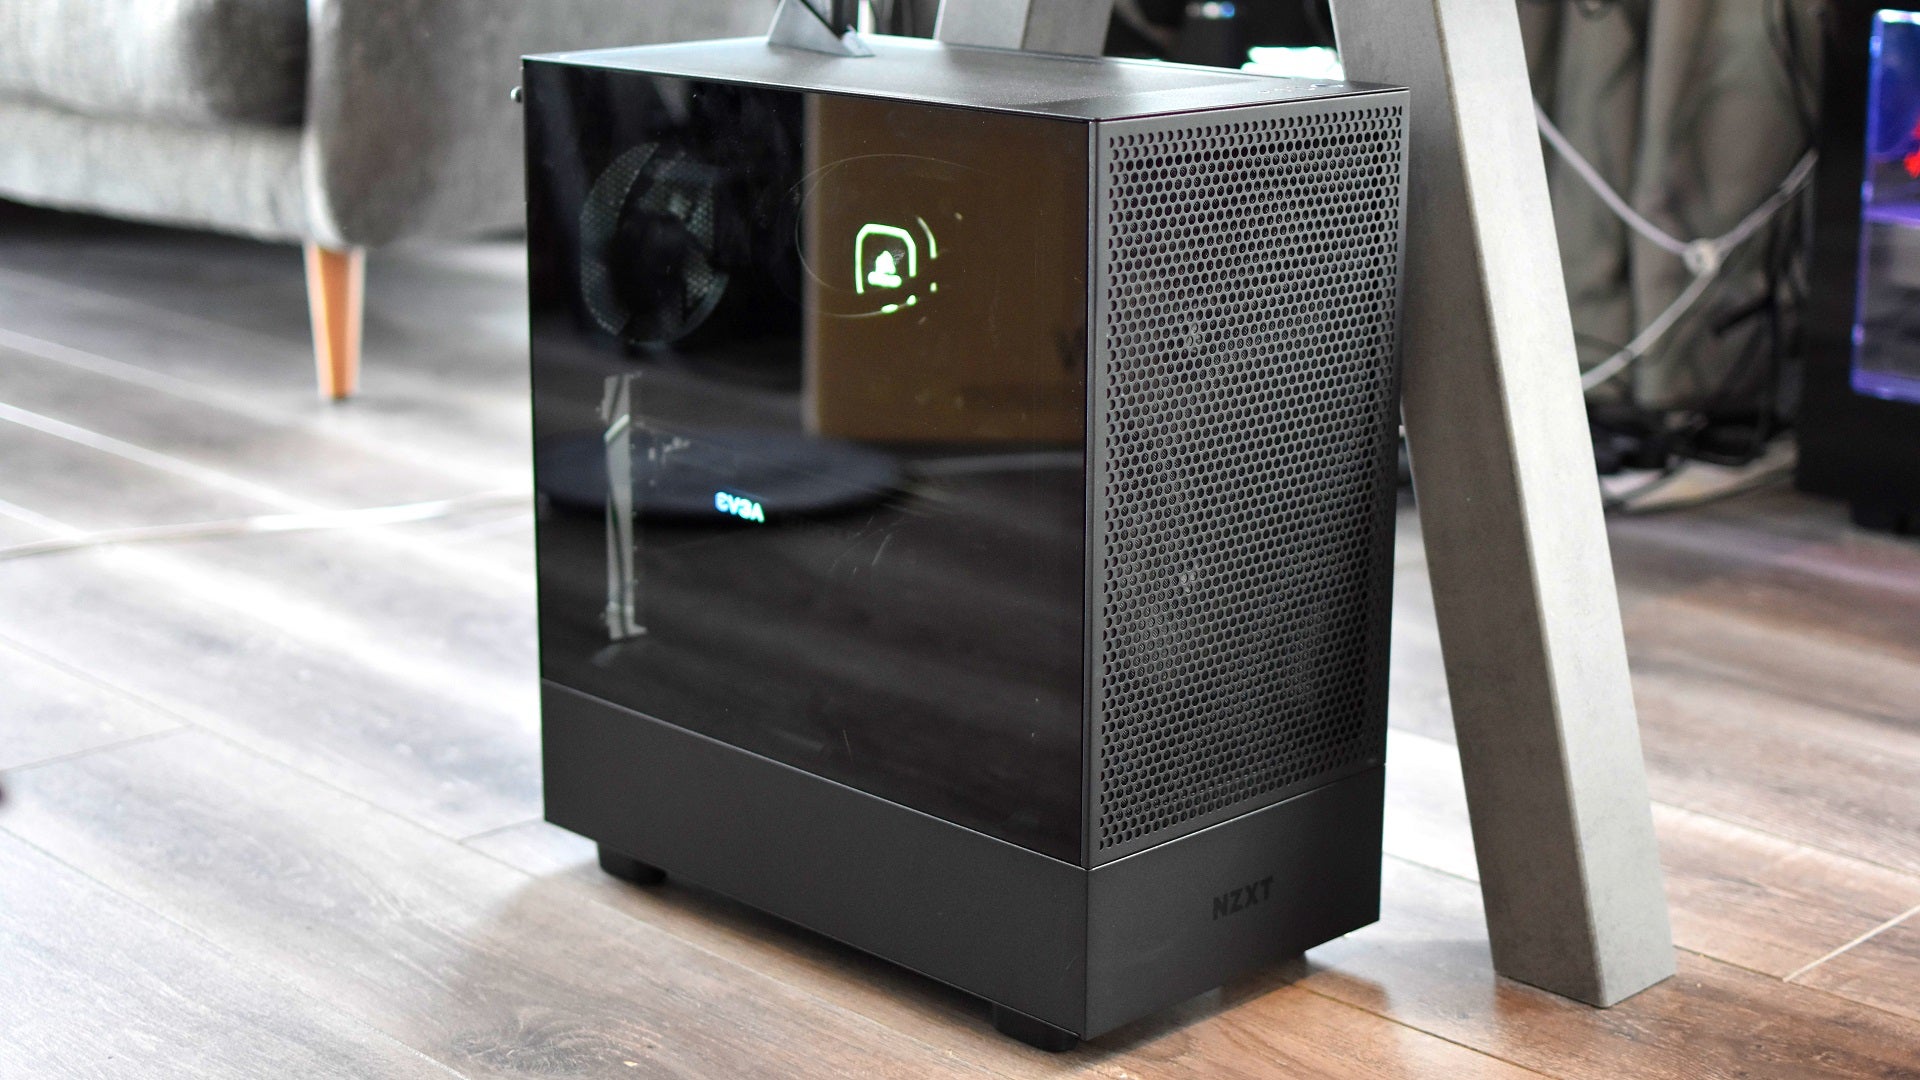 At last, NZXT made a PC case as good as their discontinued ones